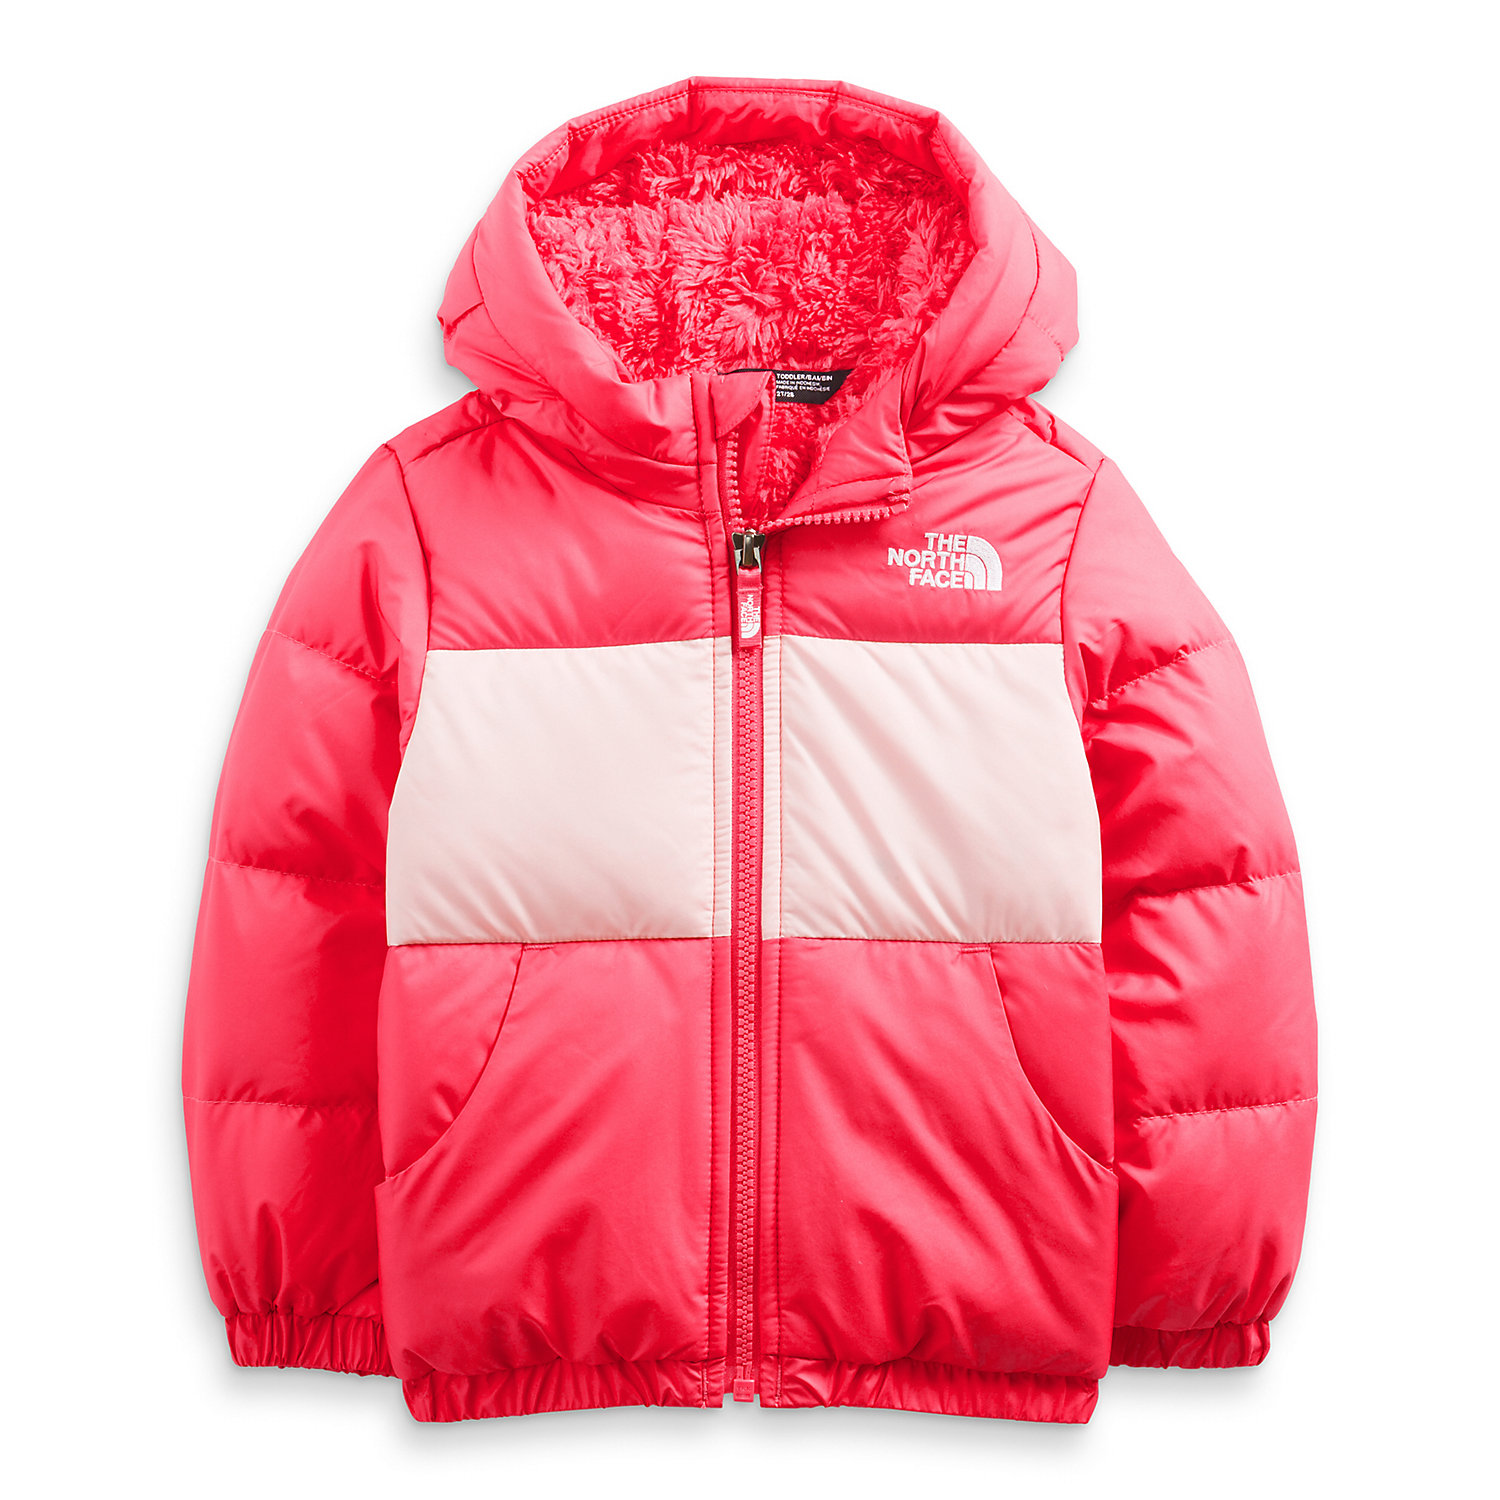 The North Face Toddler Moondoggy Hoodie